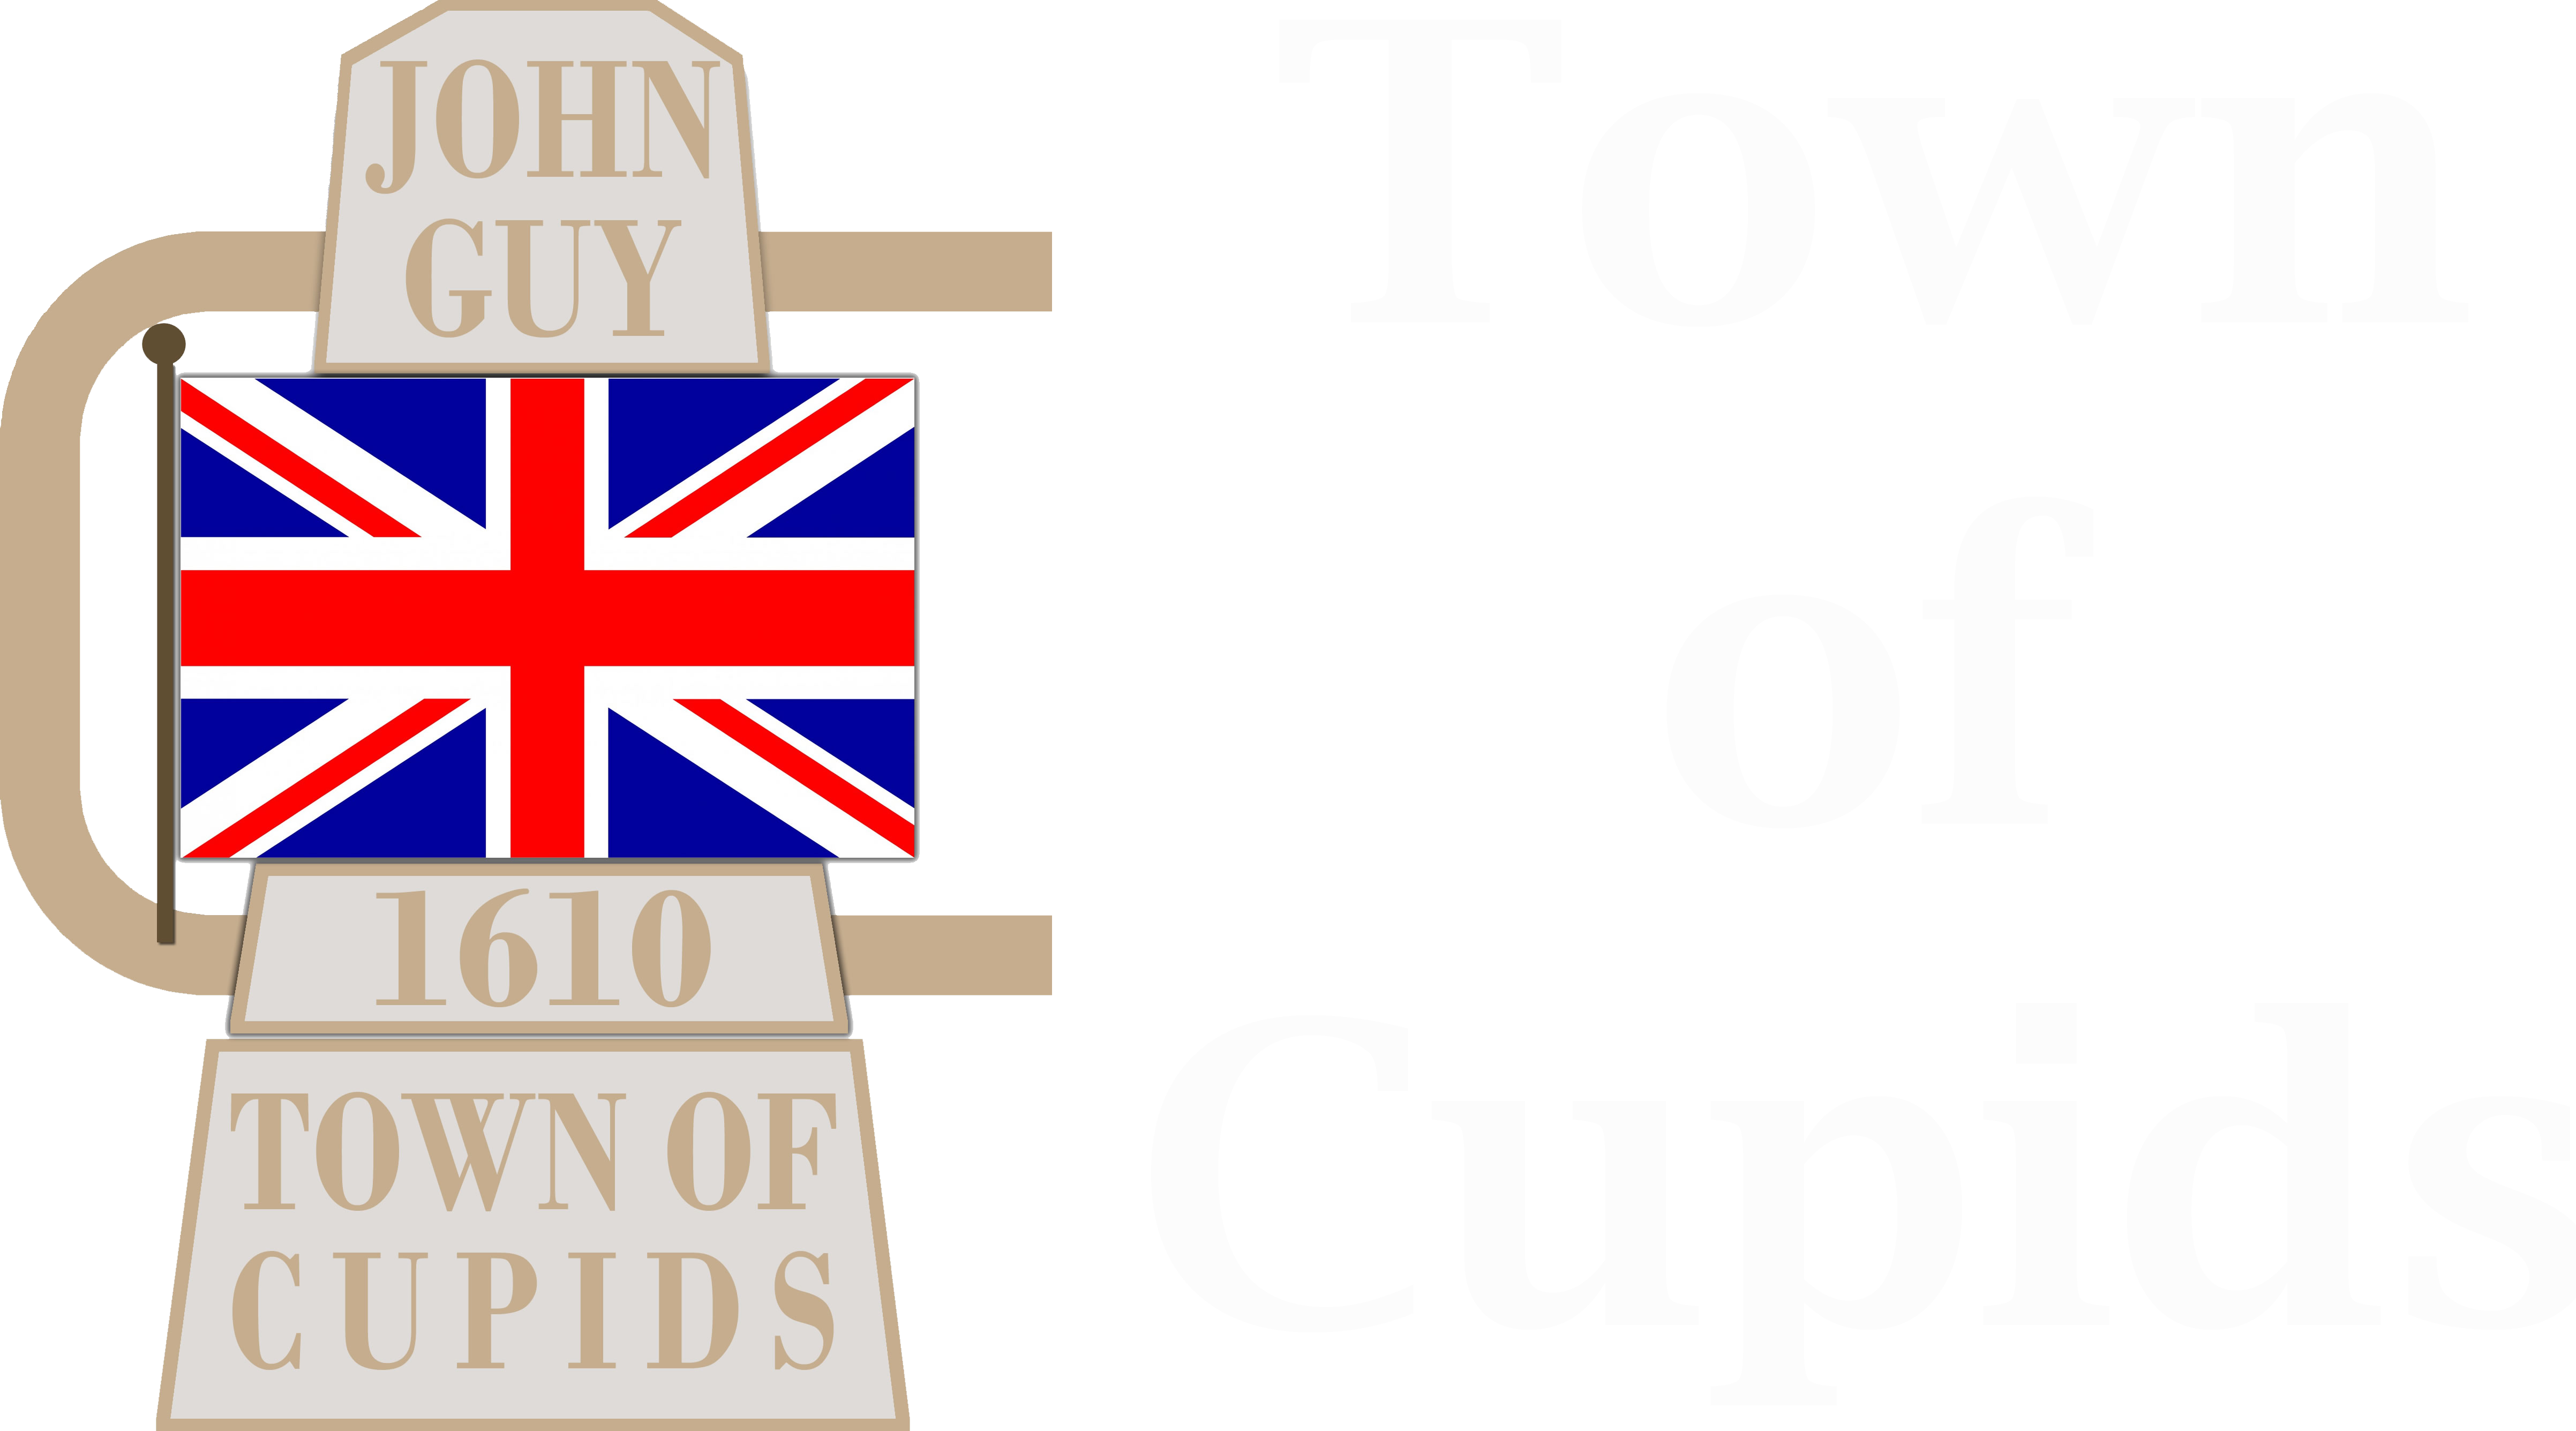 Town of Cupids